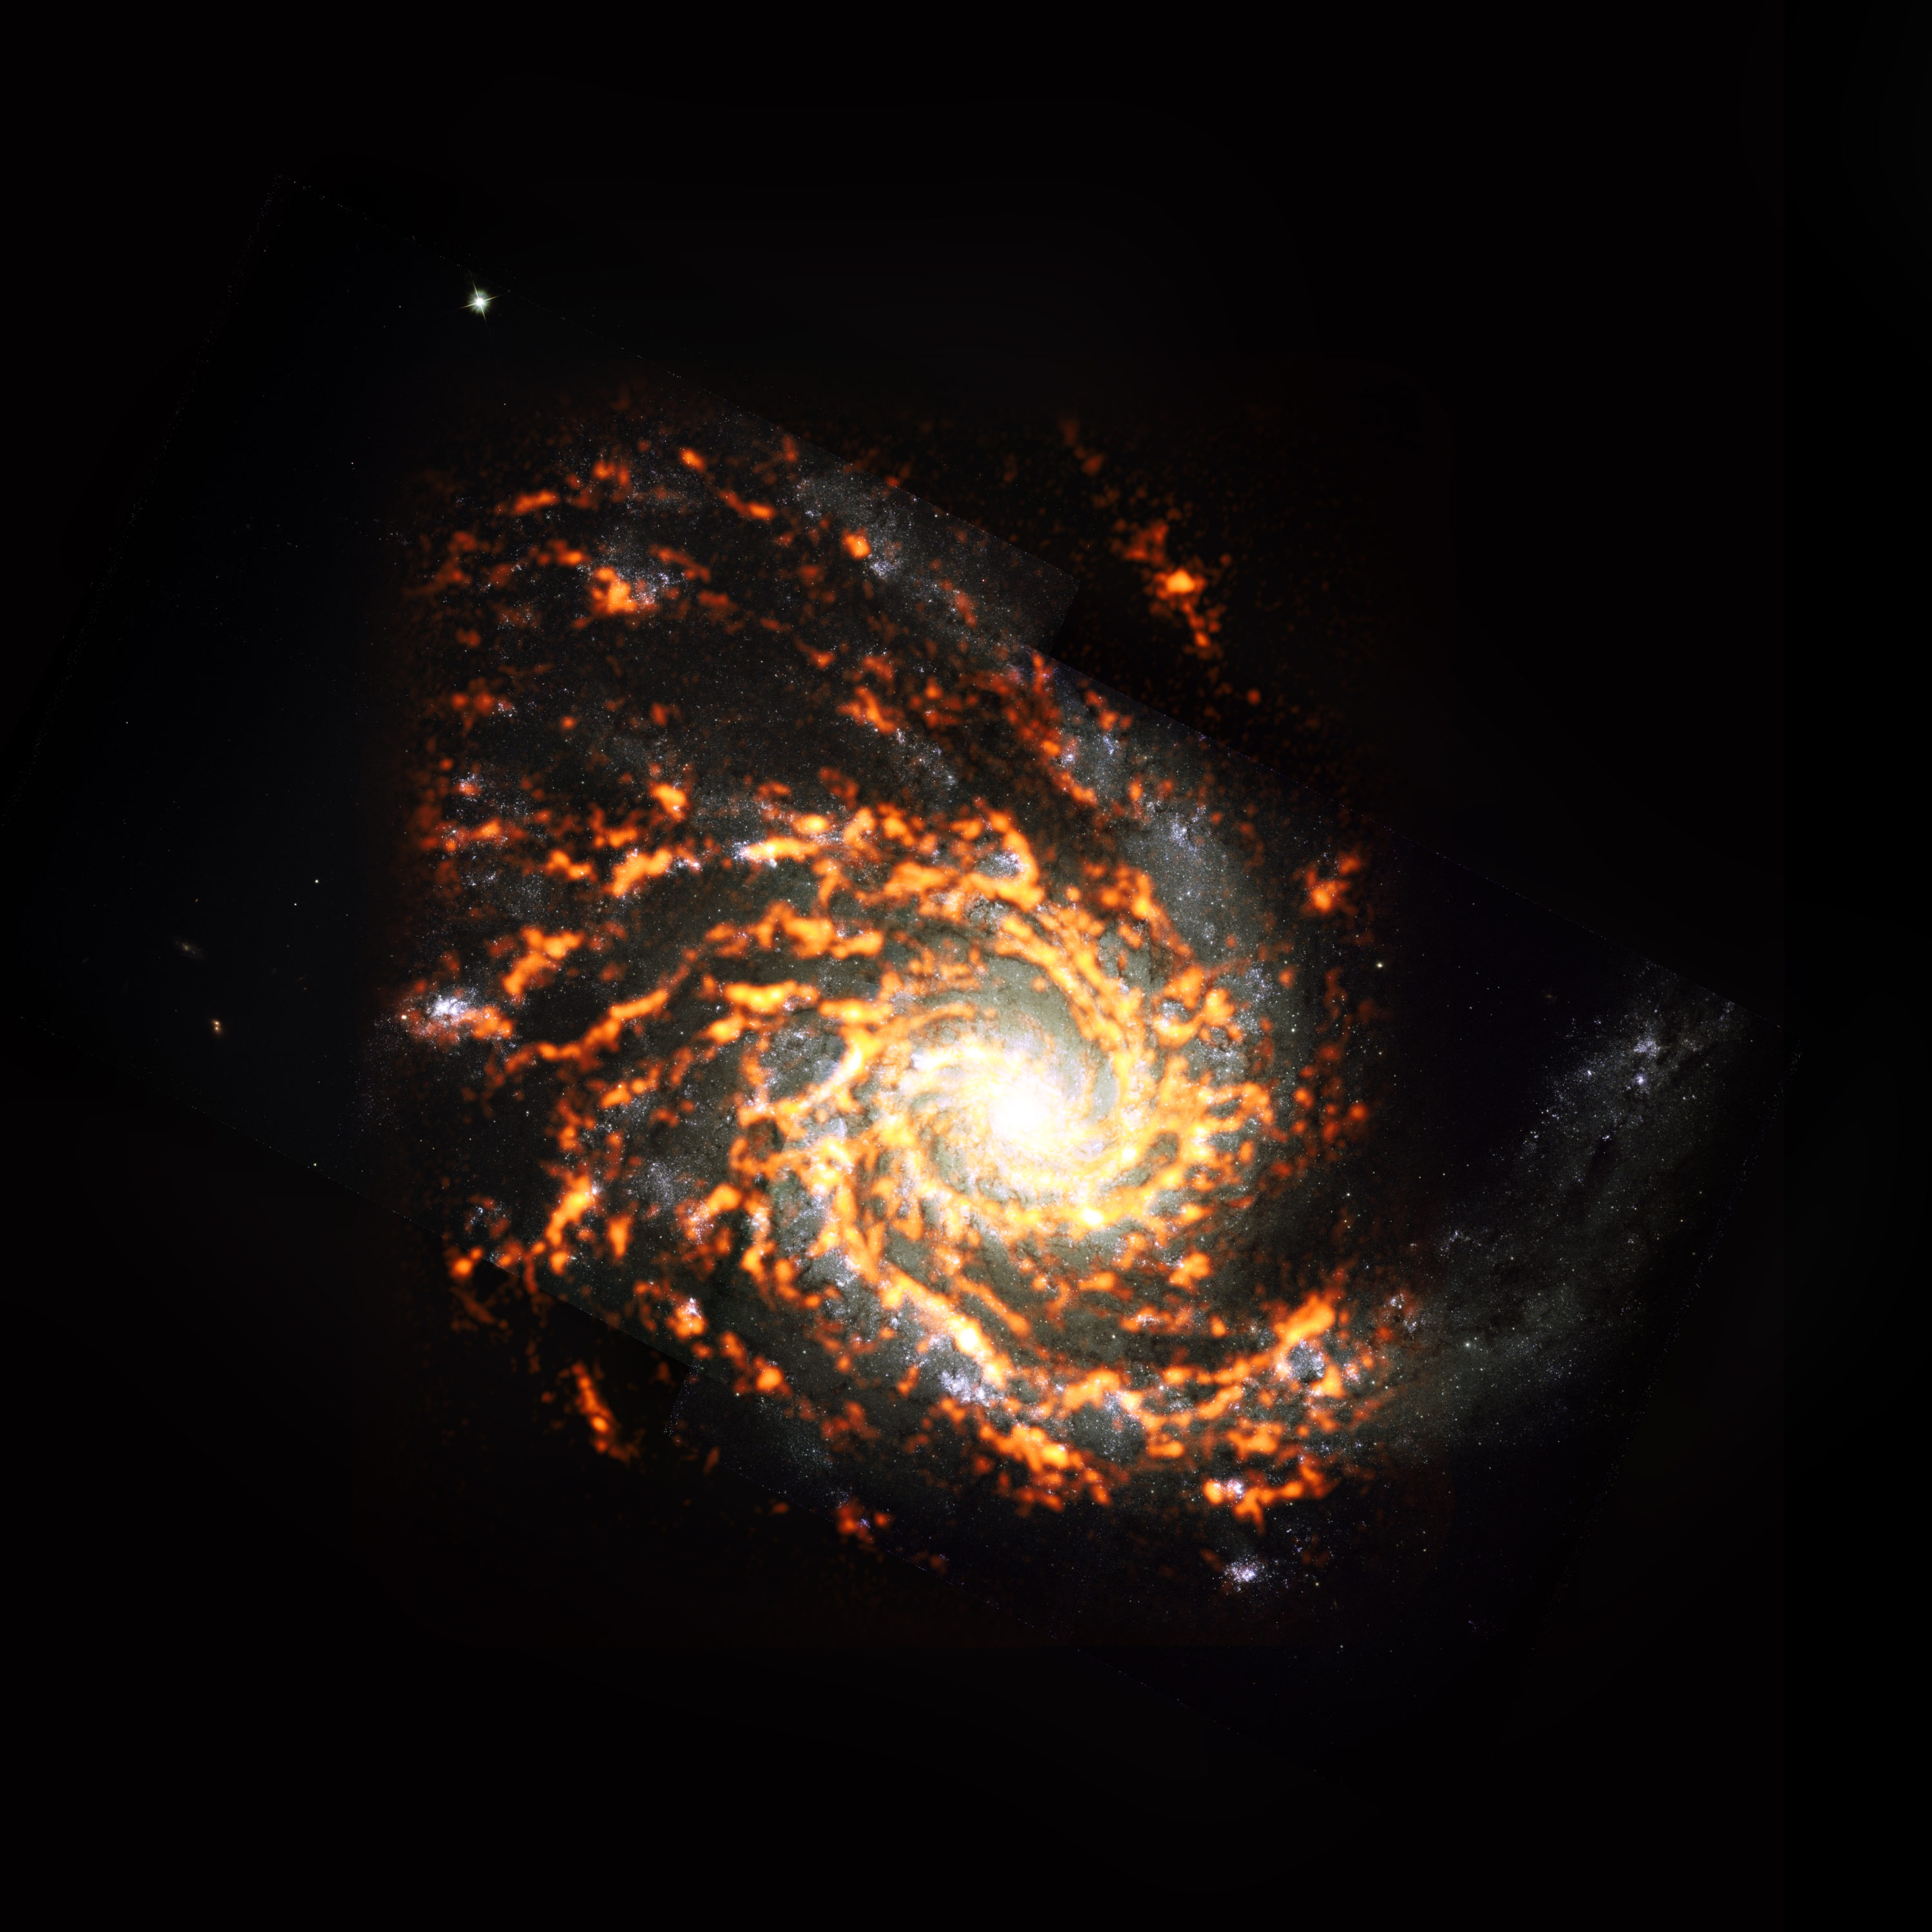 Shown here as an ALMA (orange/red) composite with Hubble Space Telescope (HST) data, NGC4254 was among the nearly 100 galaxies included in the recent PHANGS project census of galaxies in the nearby Universe. The survey found that stellar nurseries within these galaxies vary widely in appearance and behavior, and that these characteristics heavily depend on where the stellar nurseries are located. NGC4254 is an example of a galaxy featuring M type morphology. Credit: ALMA (ESO/NAOJ/NRAO)/PHANGS, S. Dagnello (NRAO)